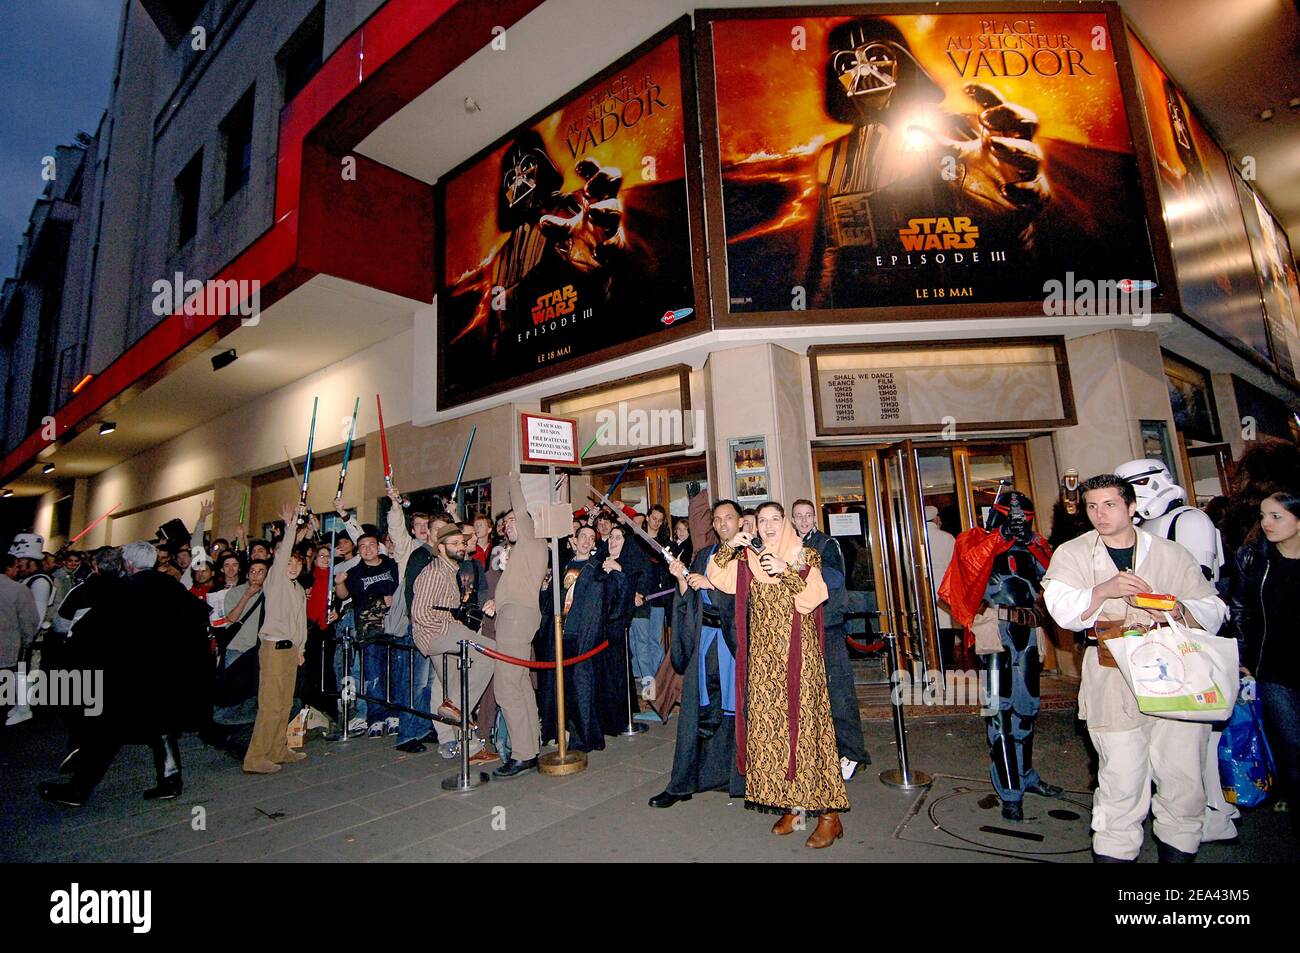 'Star Wars' fans attend the French premiere of 'Star Wars Episode III: Revenge of the Sith' at the Grand Rex in Paris, France, on May 17, 2005. Photo by Giancarlo Gorassini/ABACA. Stock Photo